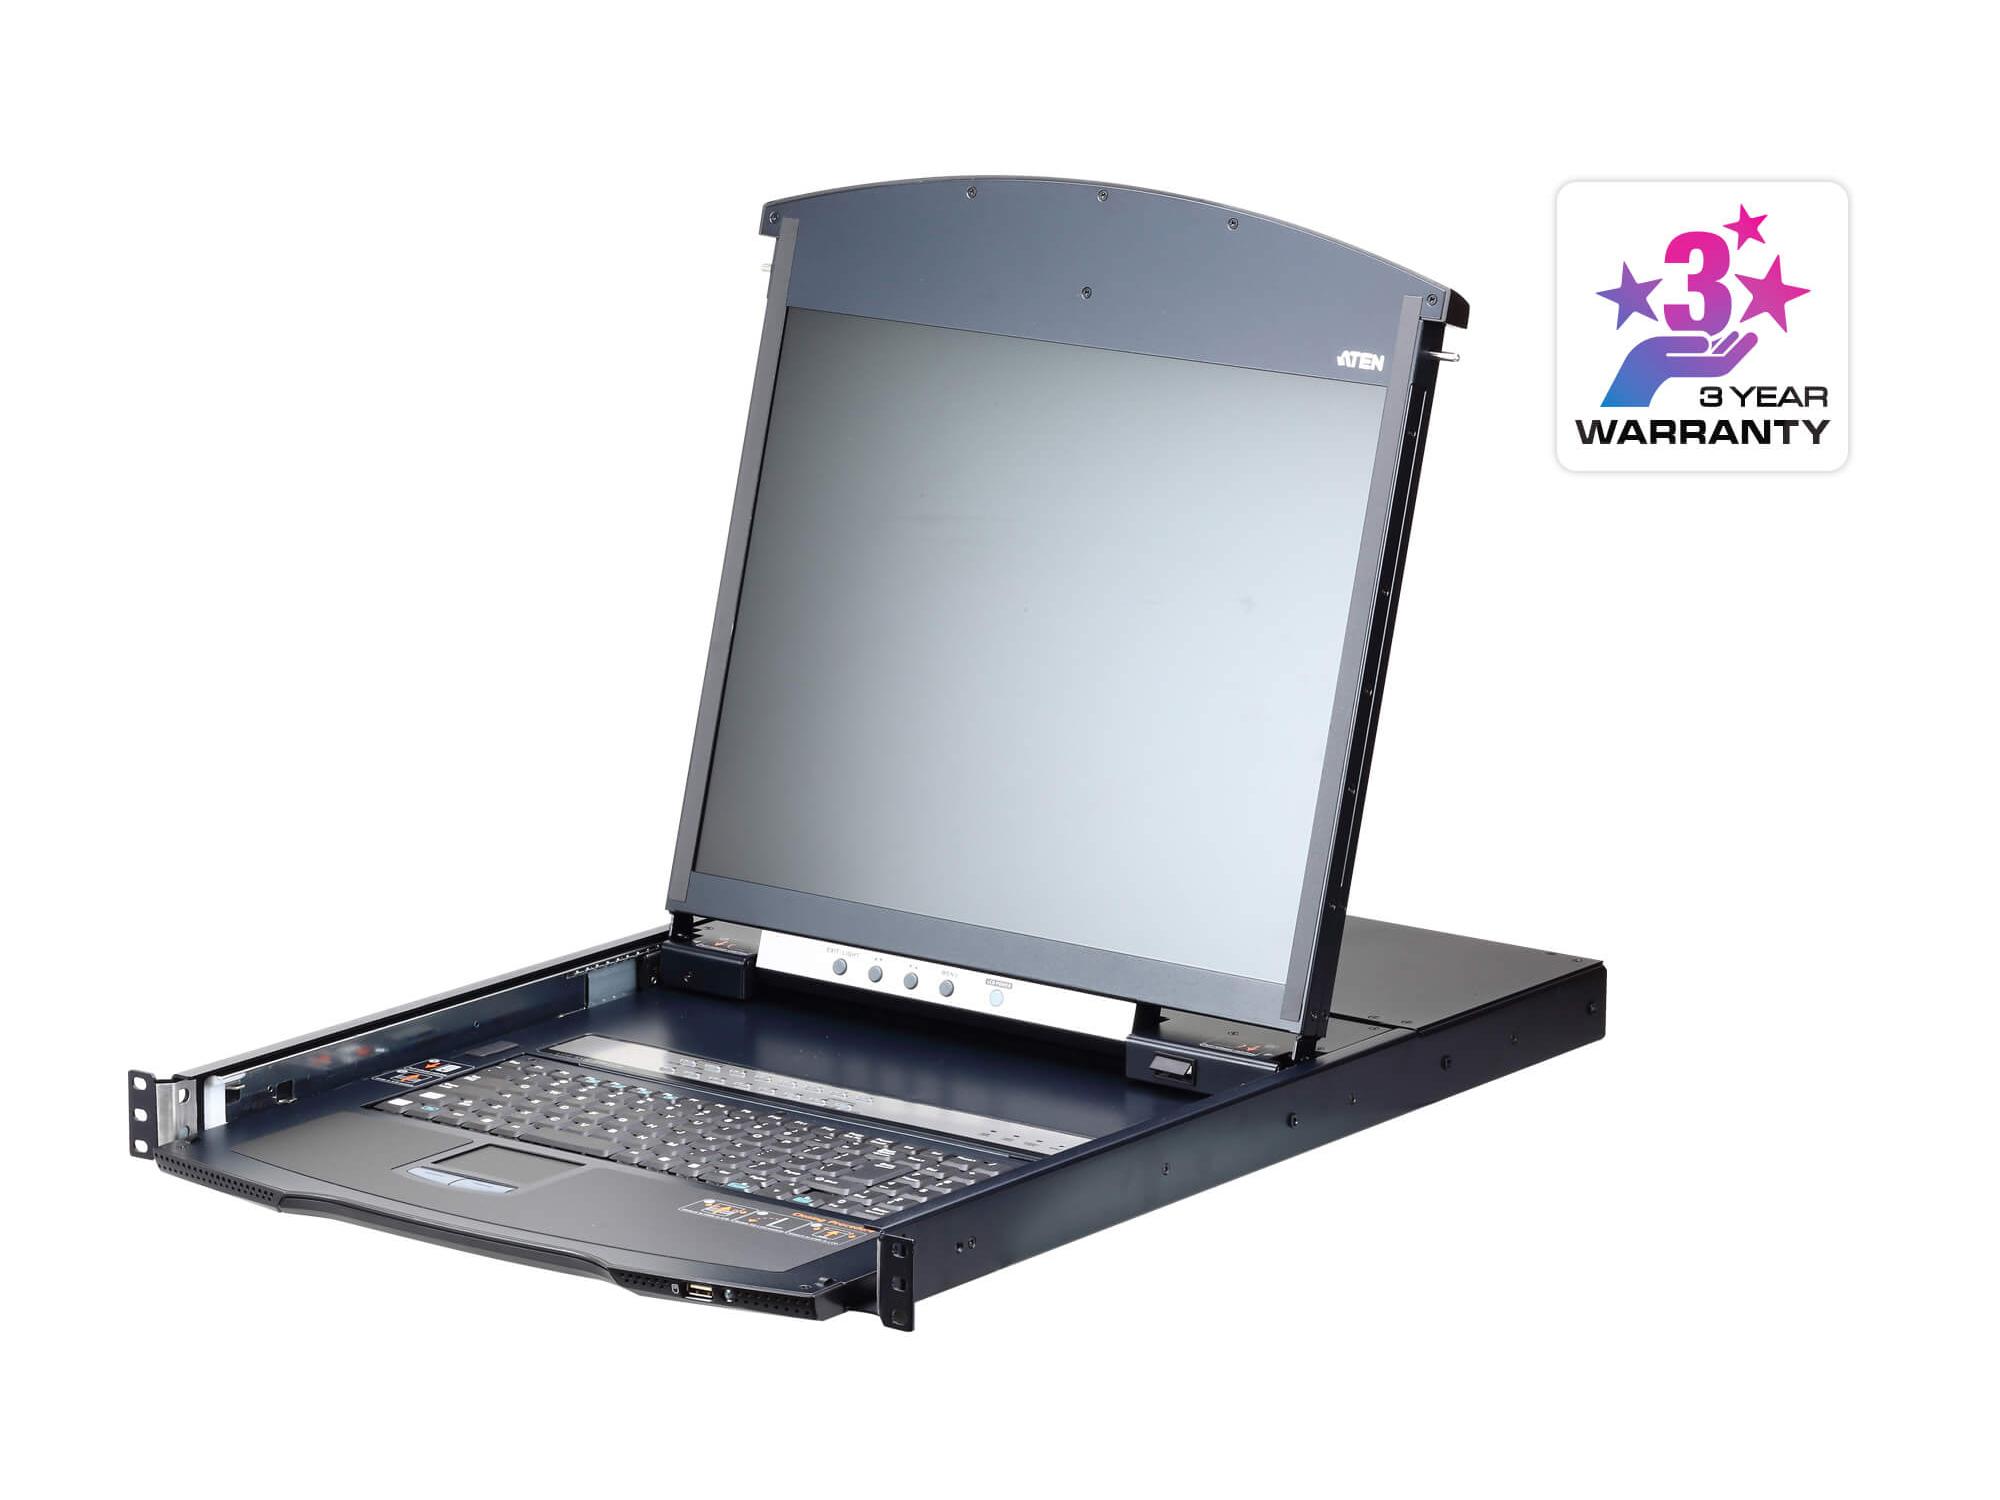 KL1116VN 16-Port Cat 5 Dual Rail 19 inch LCD KVM over IP Switch 1 Local/1 Remote User Access by Aten